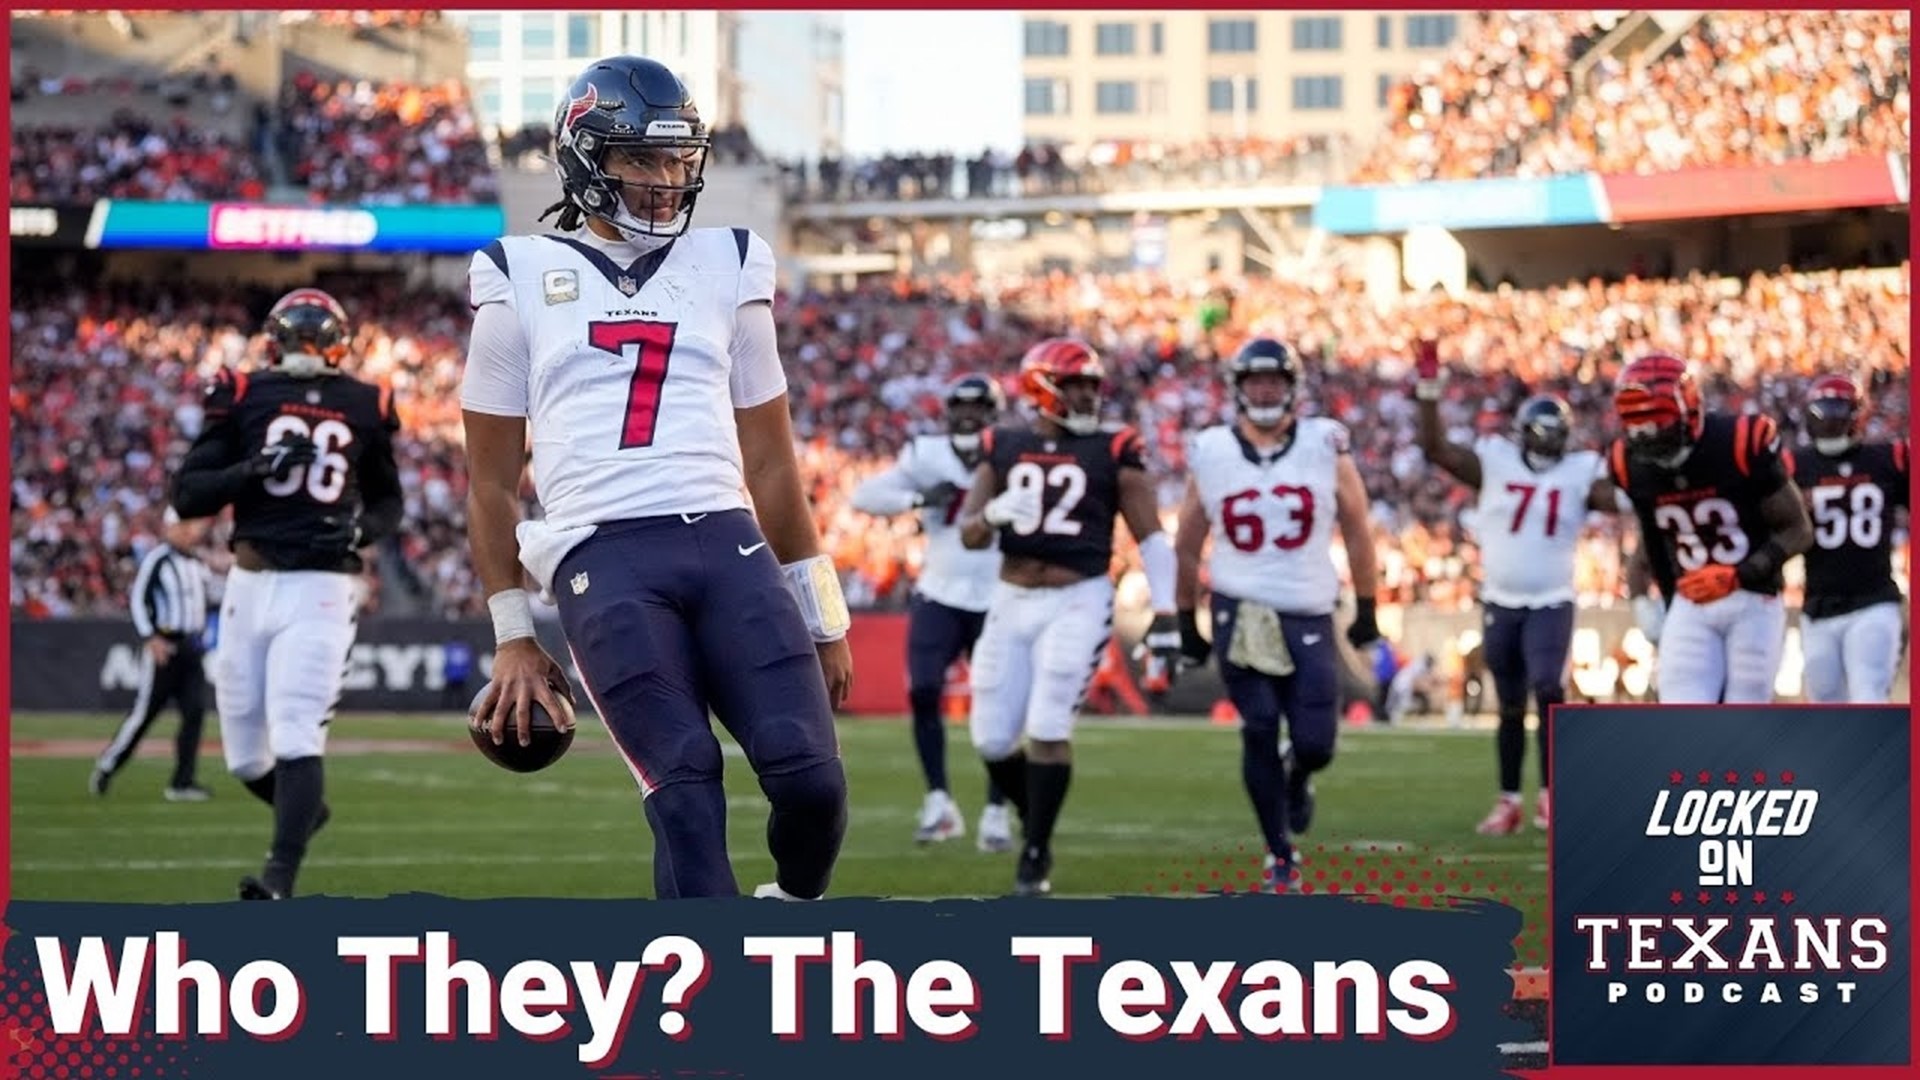 The Houston Texans were firing on all cylinders Sunday afternoon against the Cincinnati Bengals, which told the story of their big-time road victory.